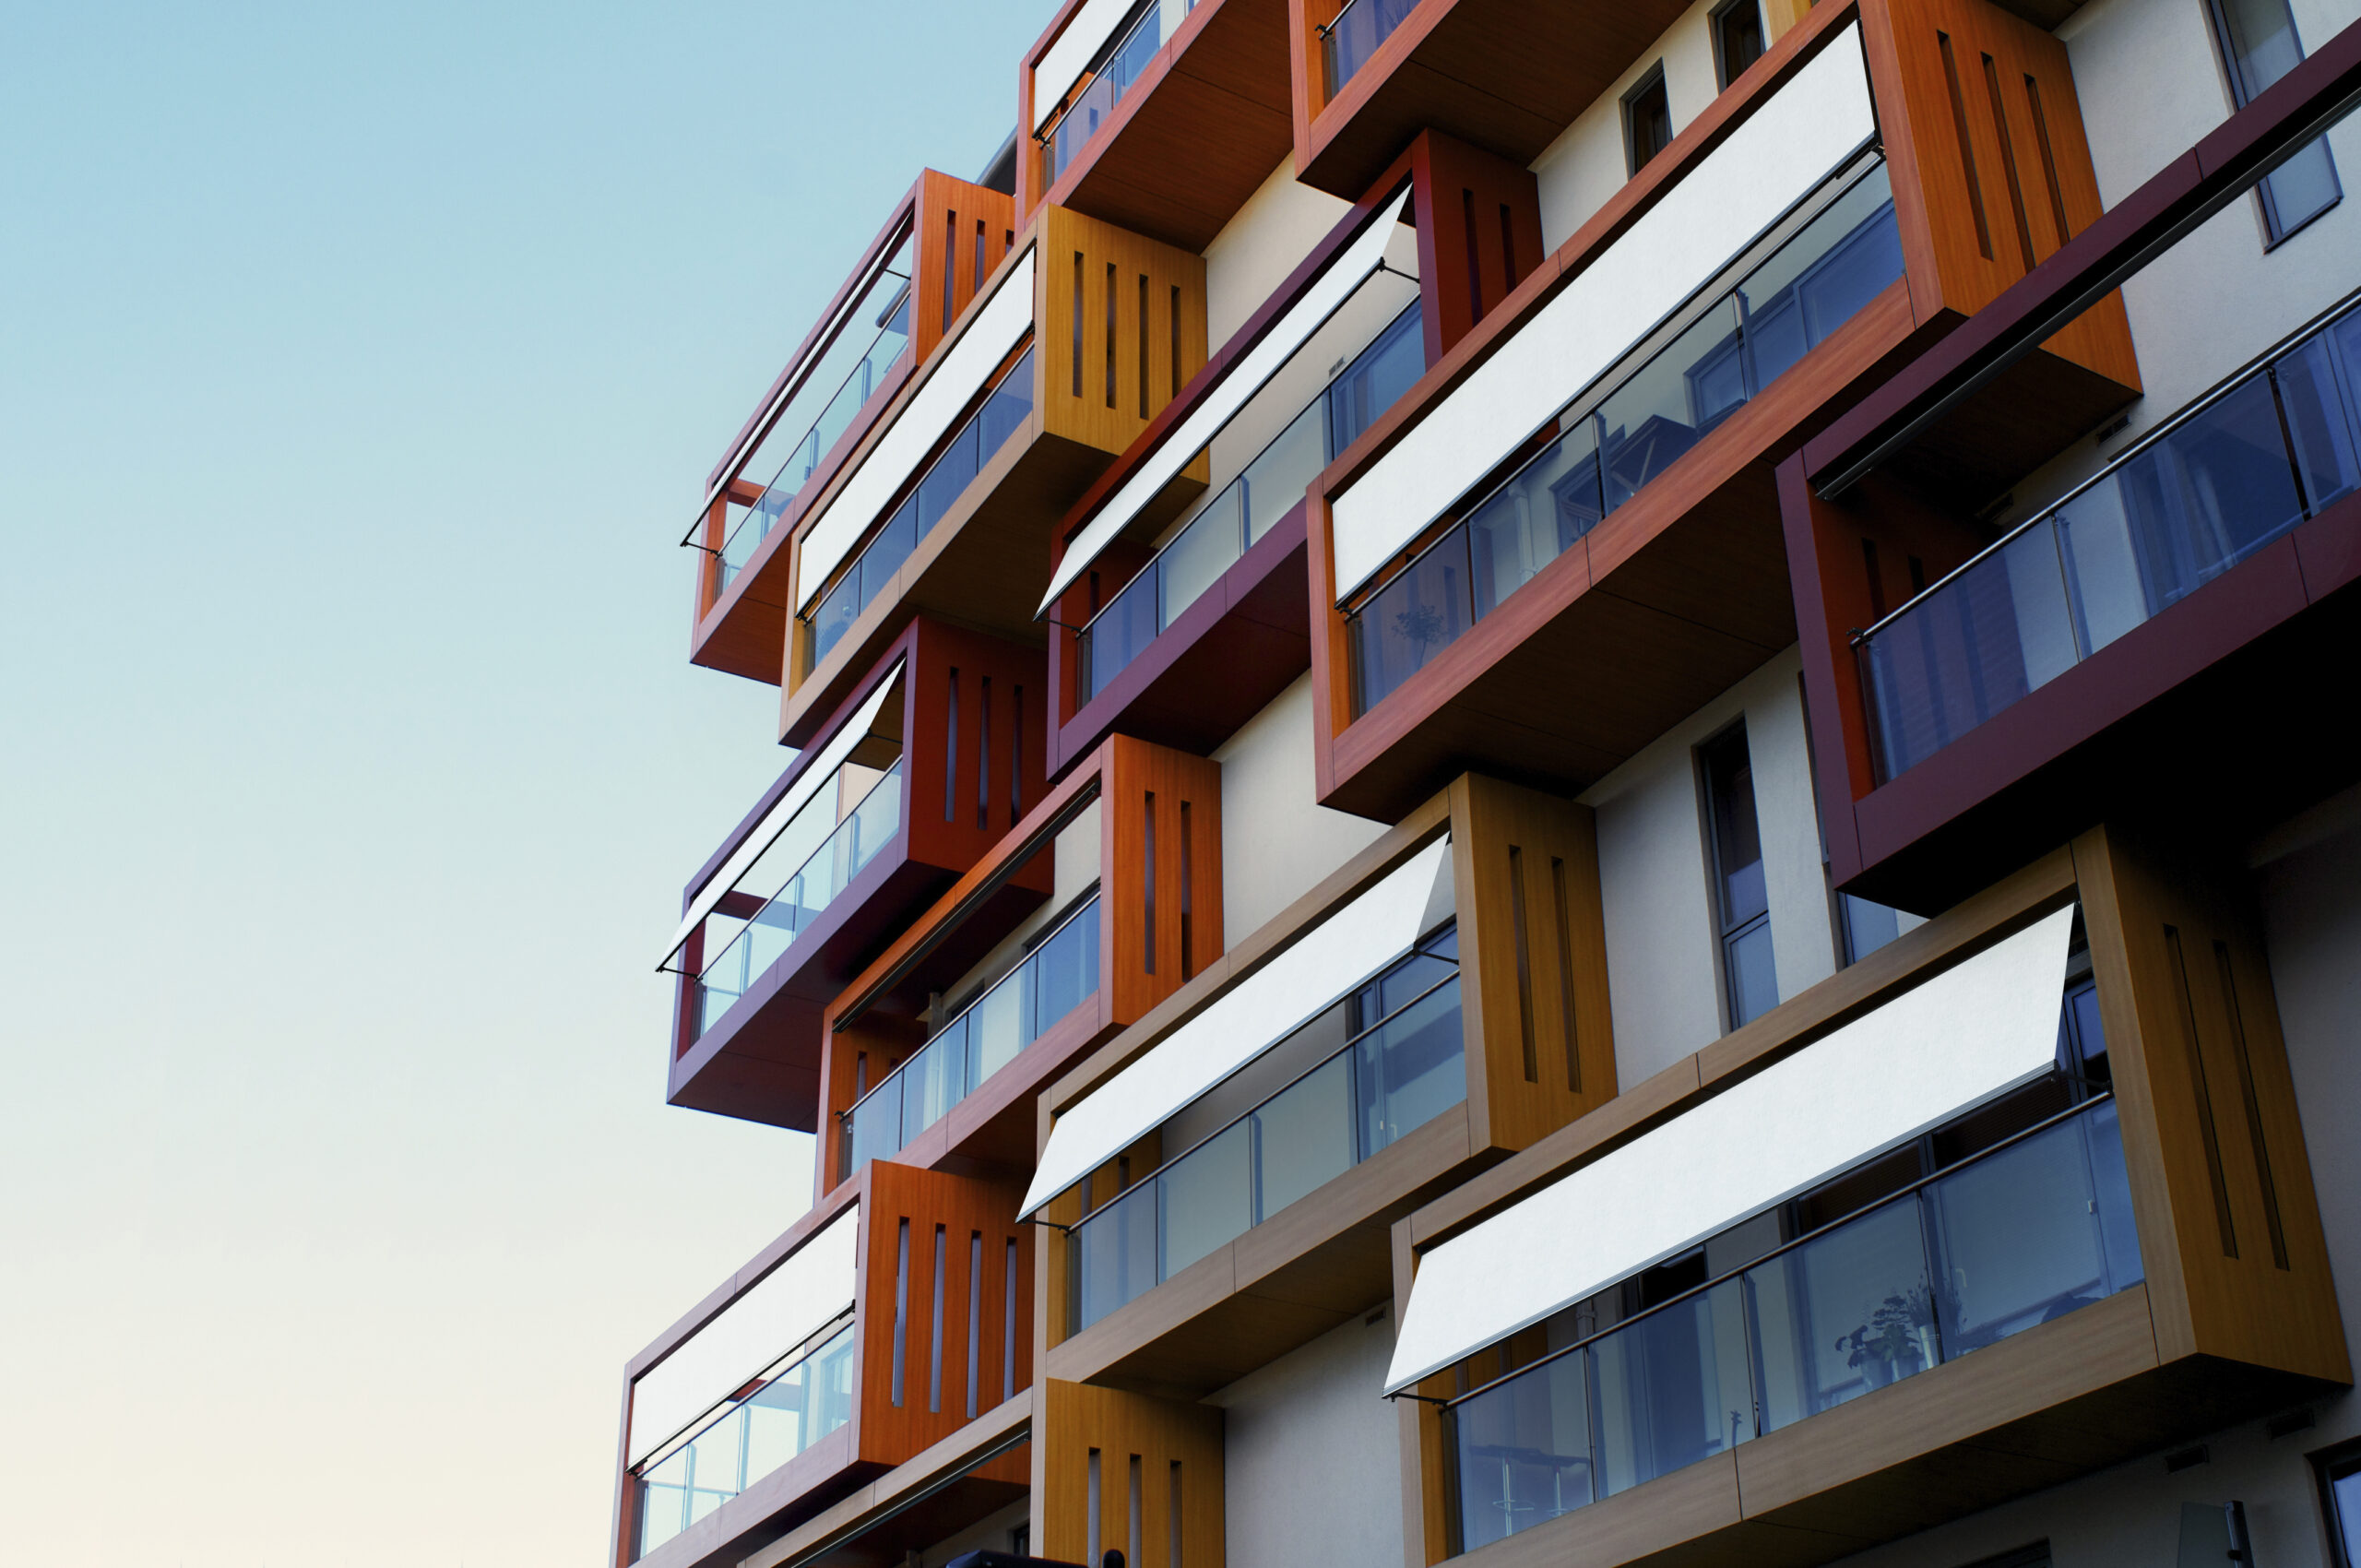 Balconies of a modern luxury apartments with a blue sky